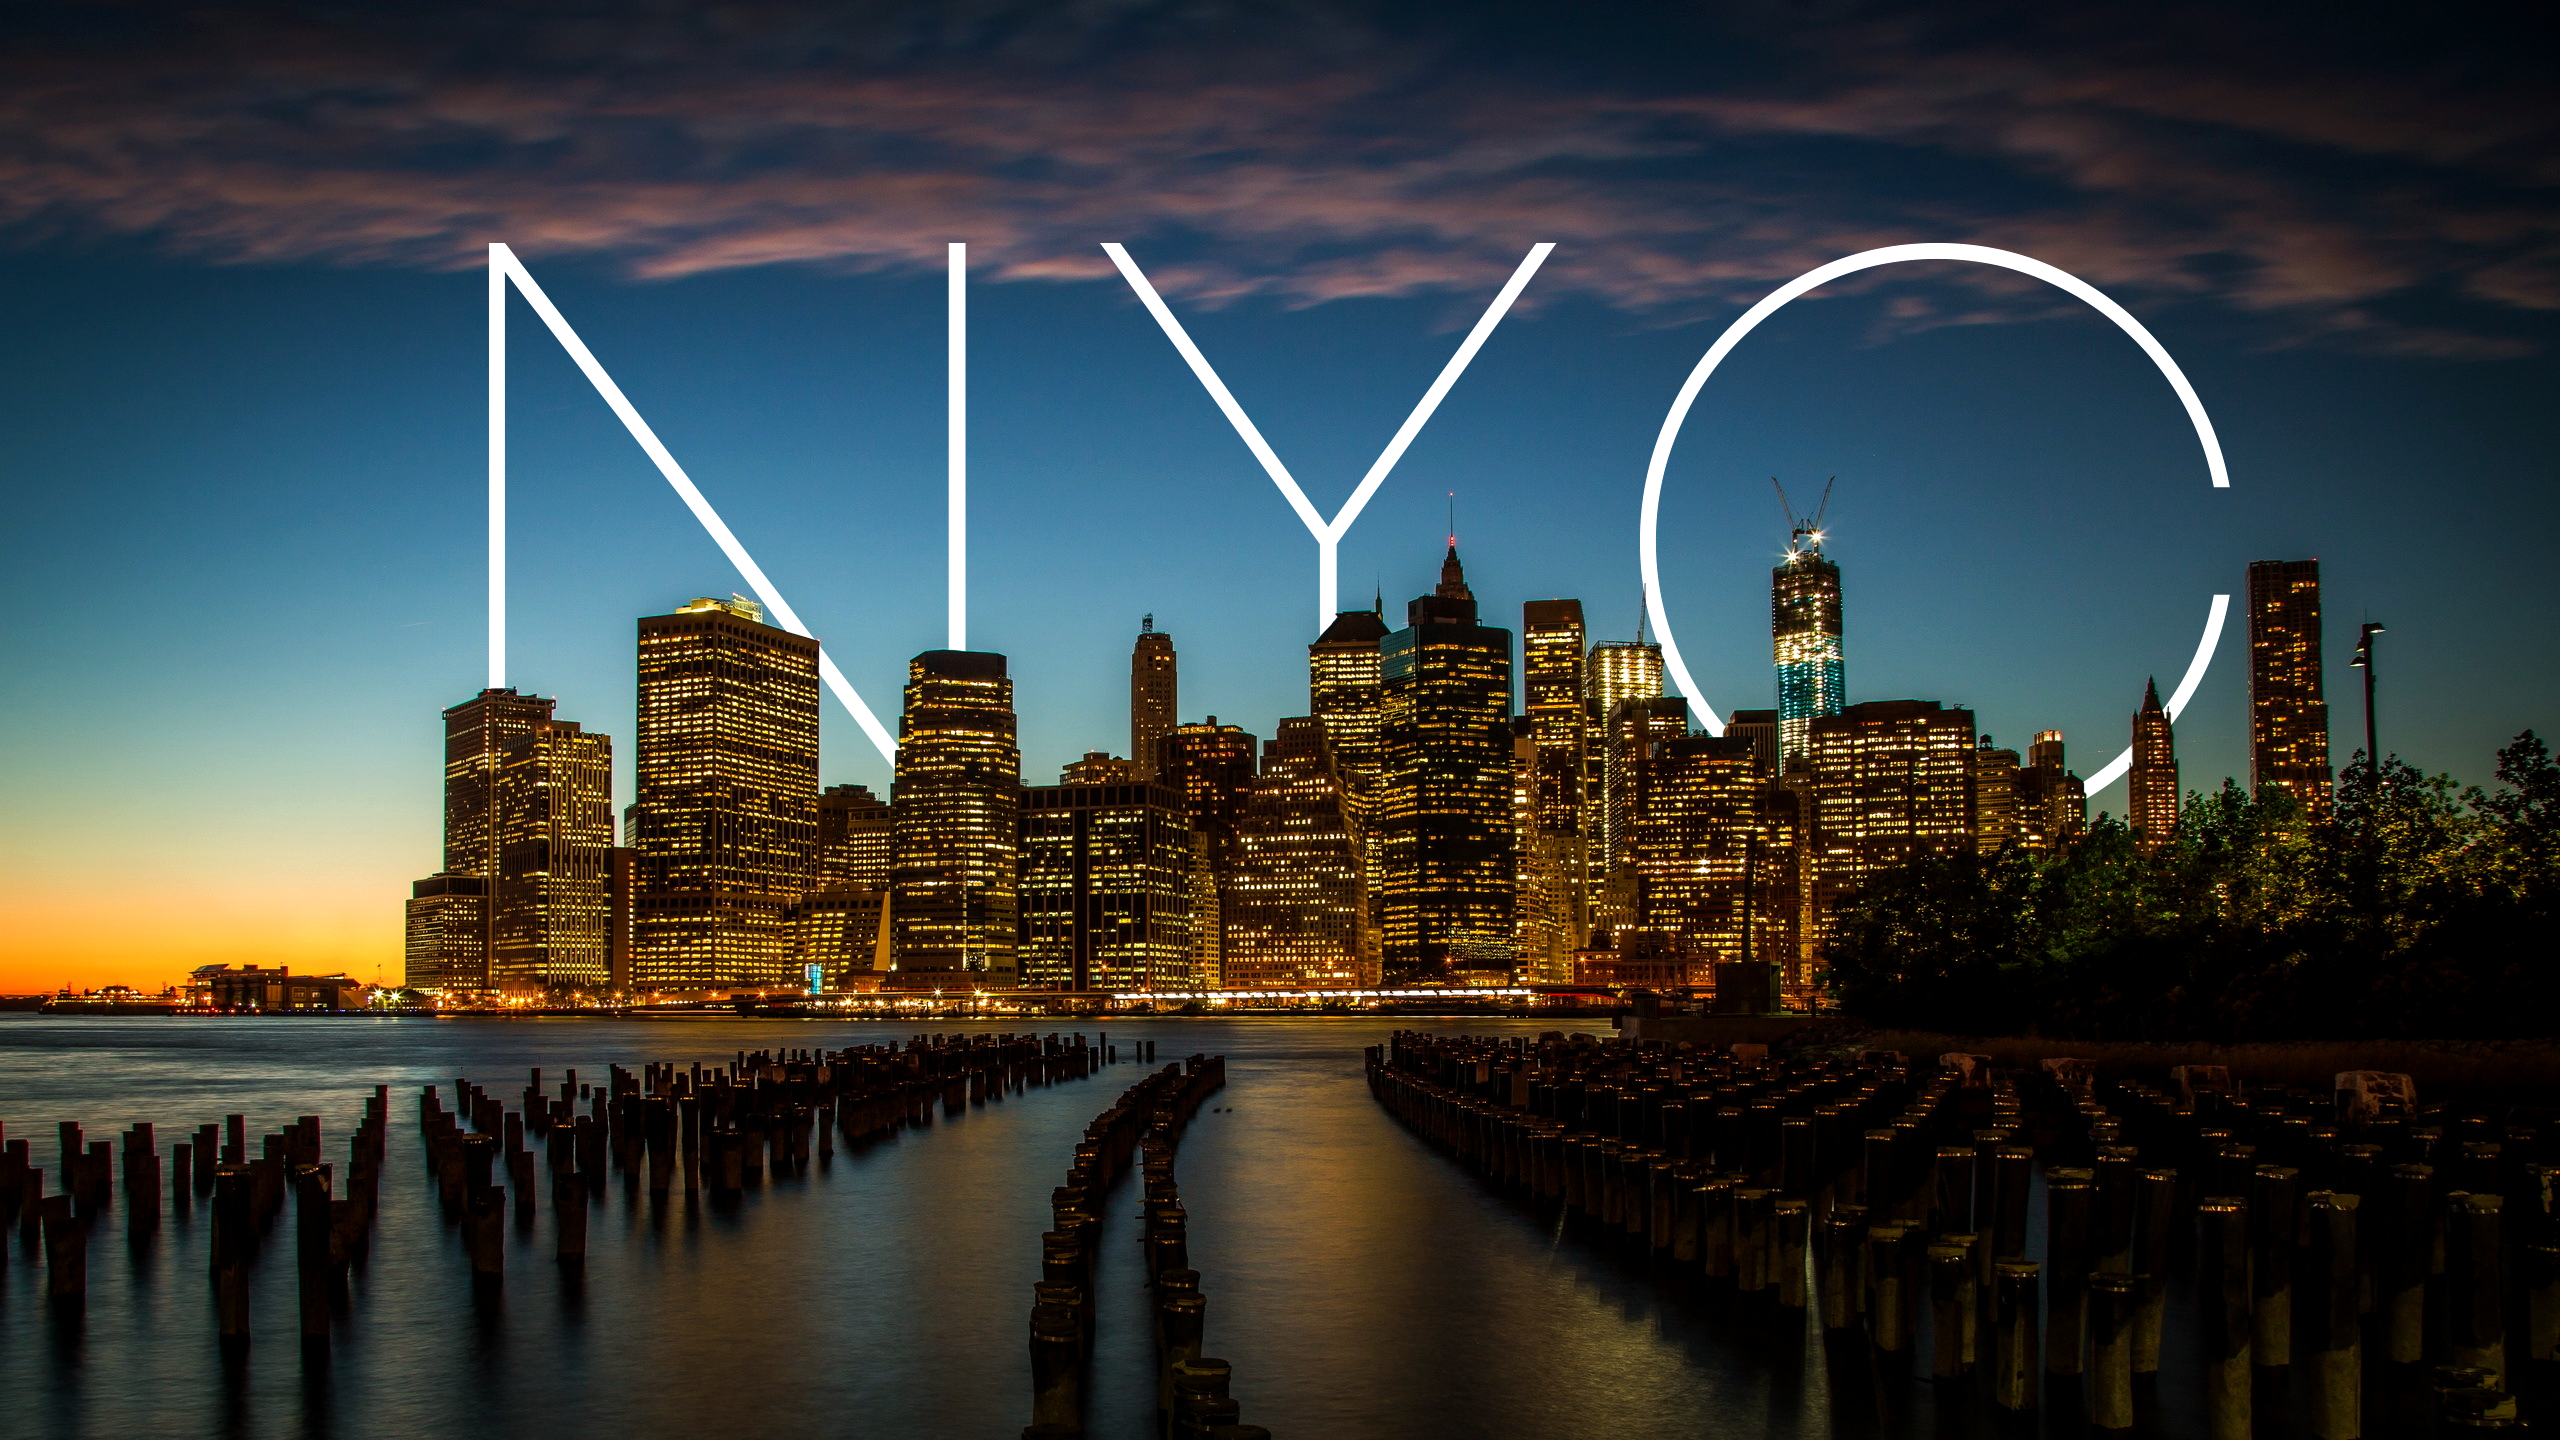 New York City Wallpaper   HD Wallpapers Backgrounds of